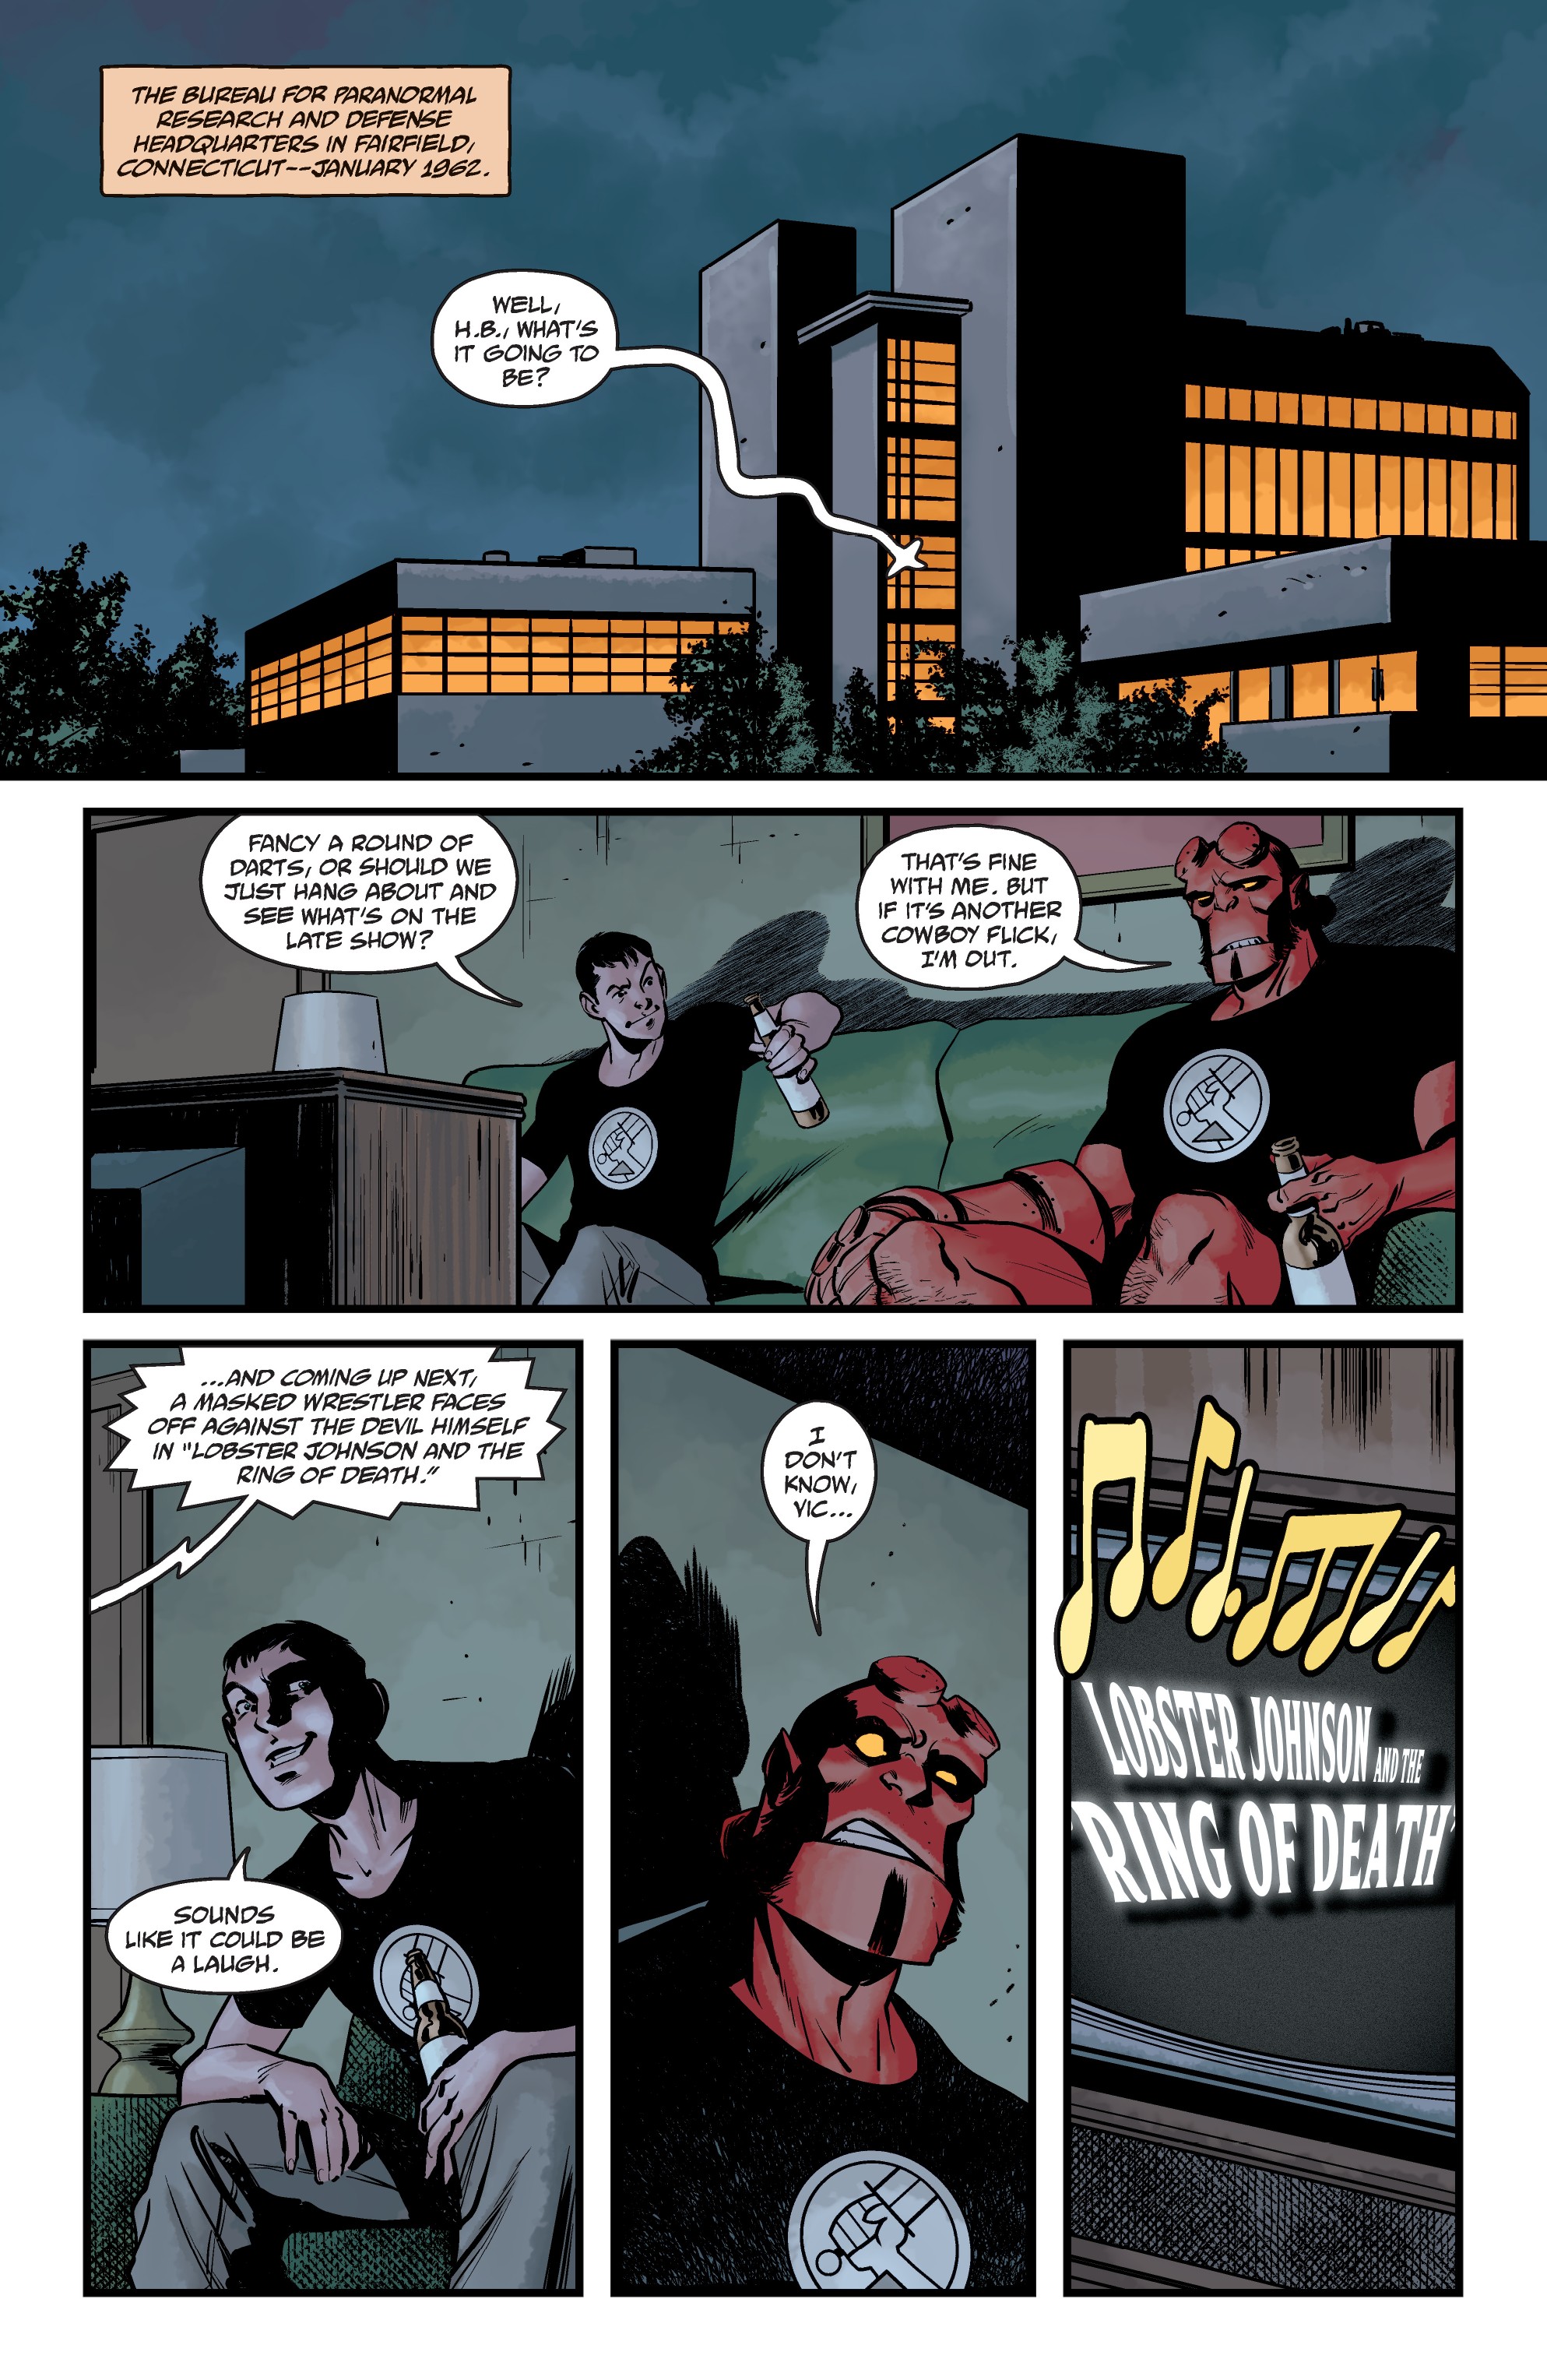 Hellboy vs. Lobster Johnson in: The Ring of Death (2019-): Chapter 1 - Page 3